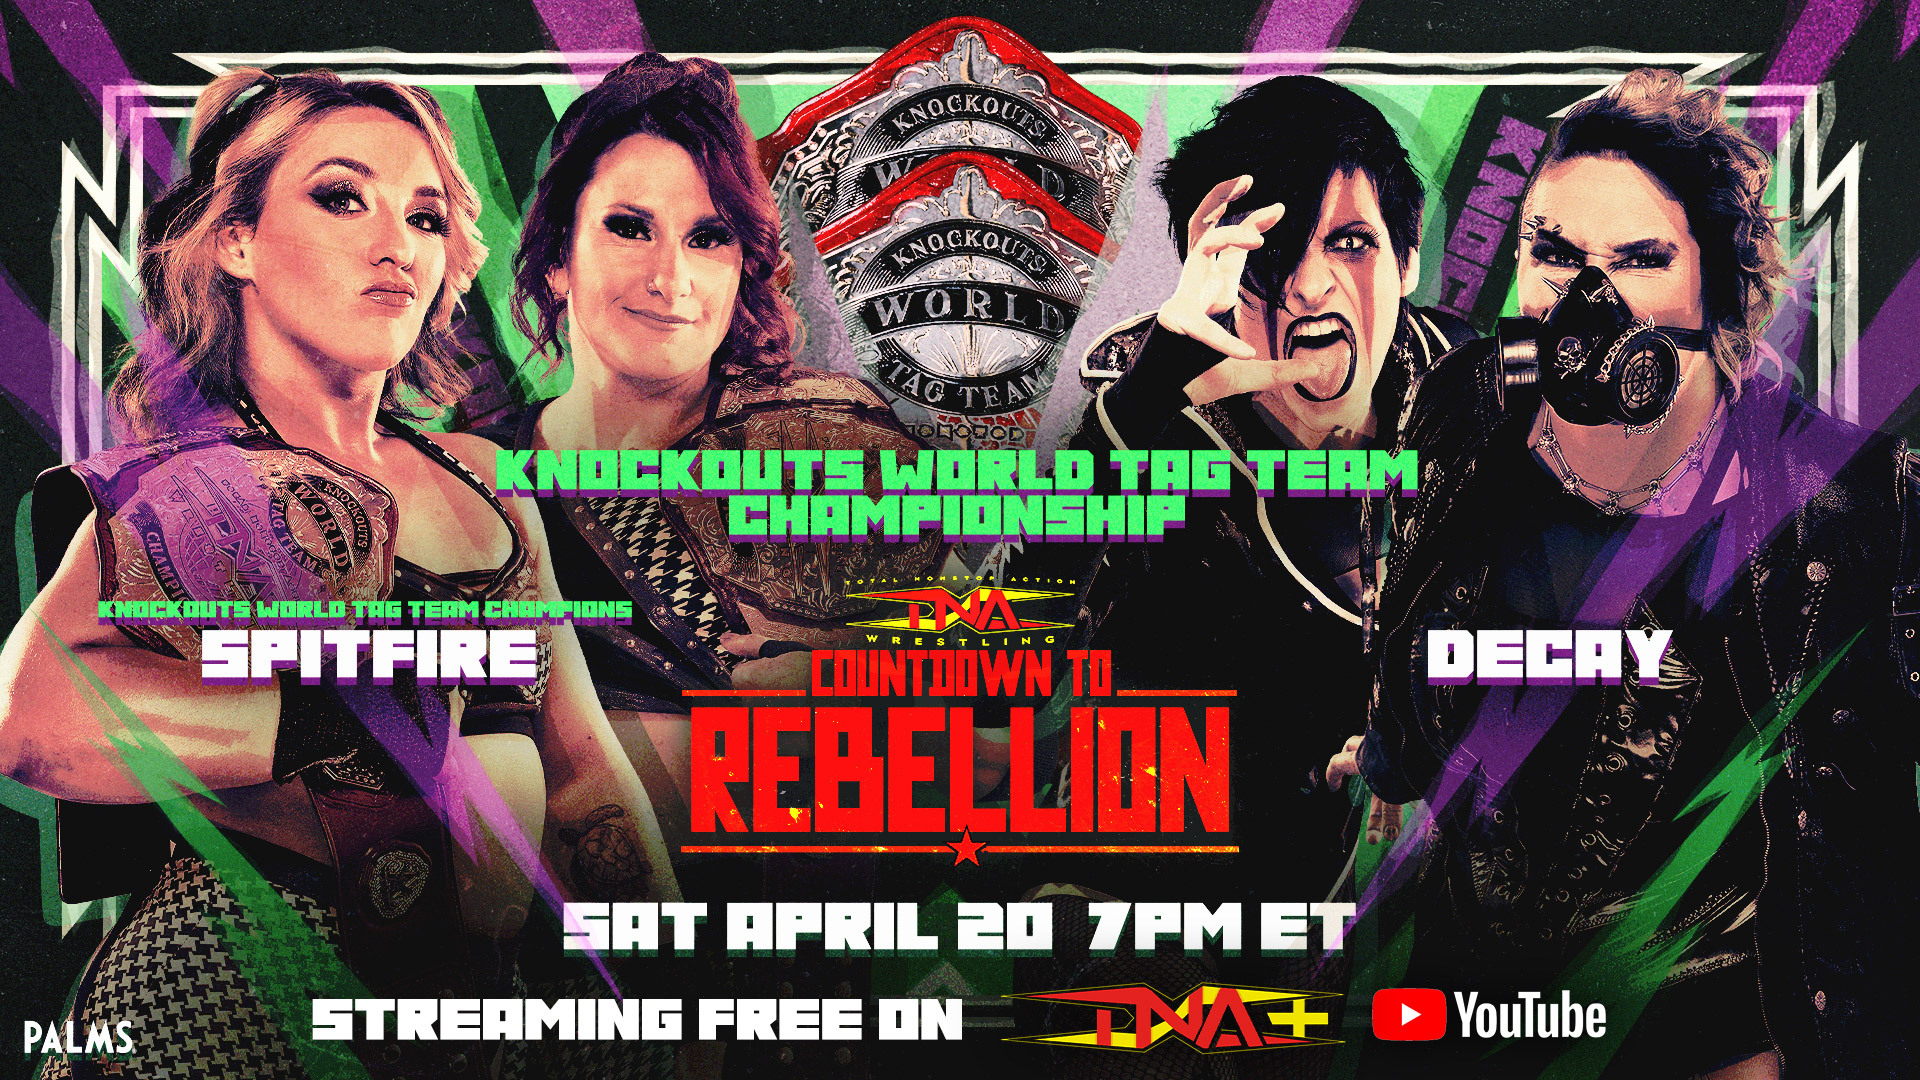 SDL vs. Juggernaut Is Official For Rebellion, Decay Invokes Rematch